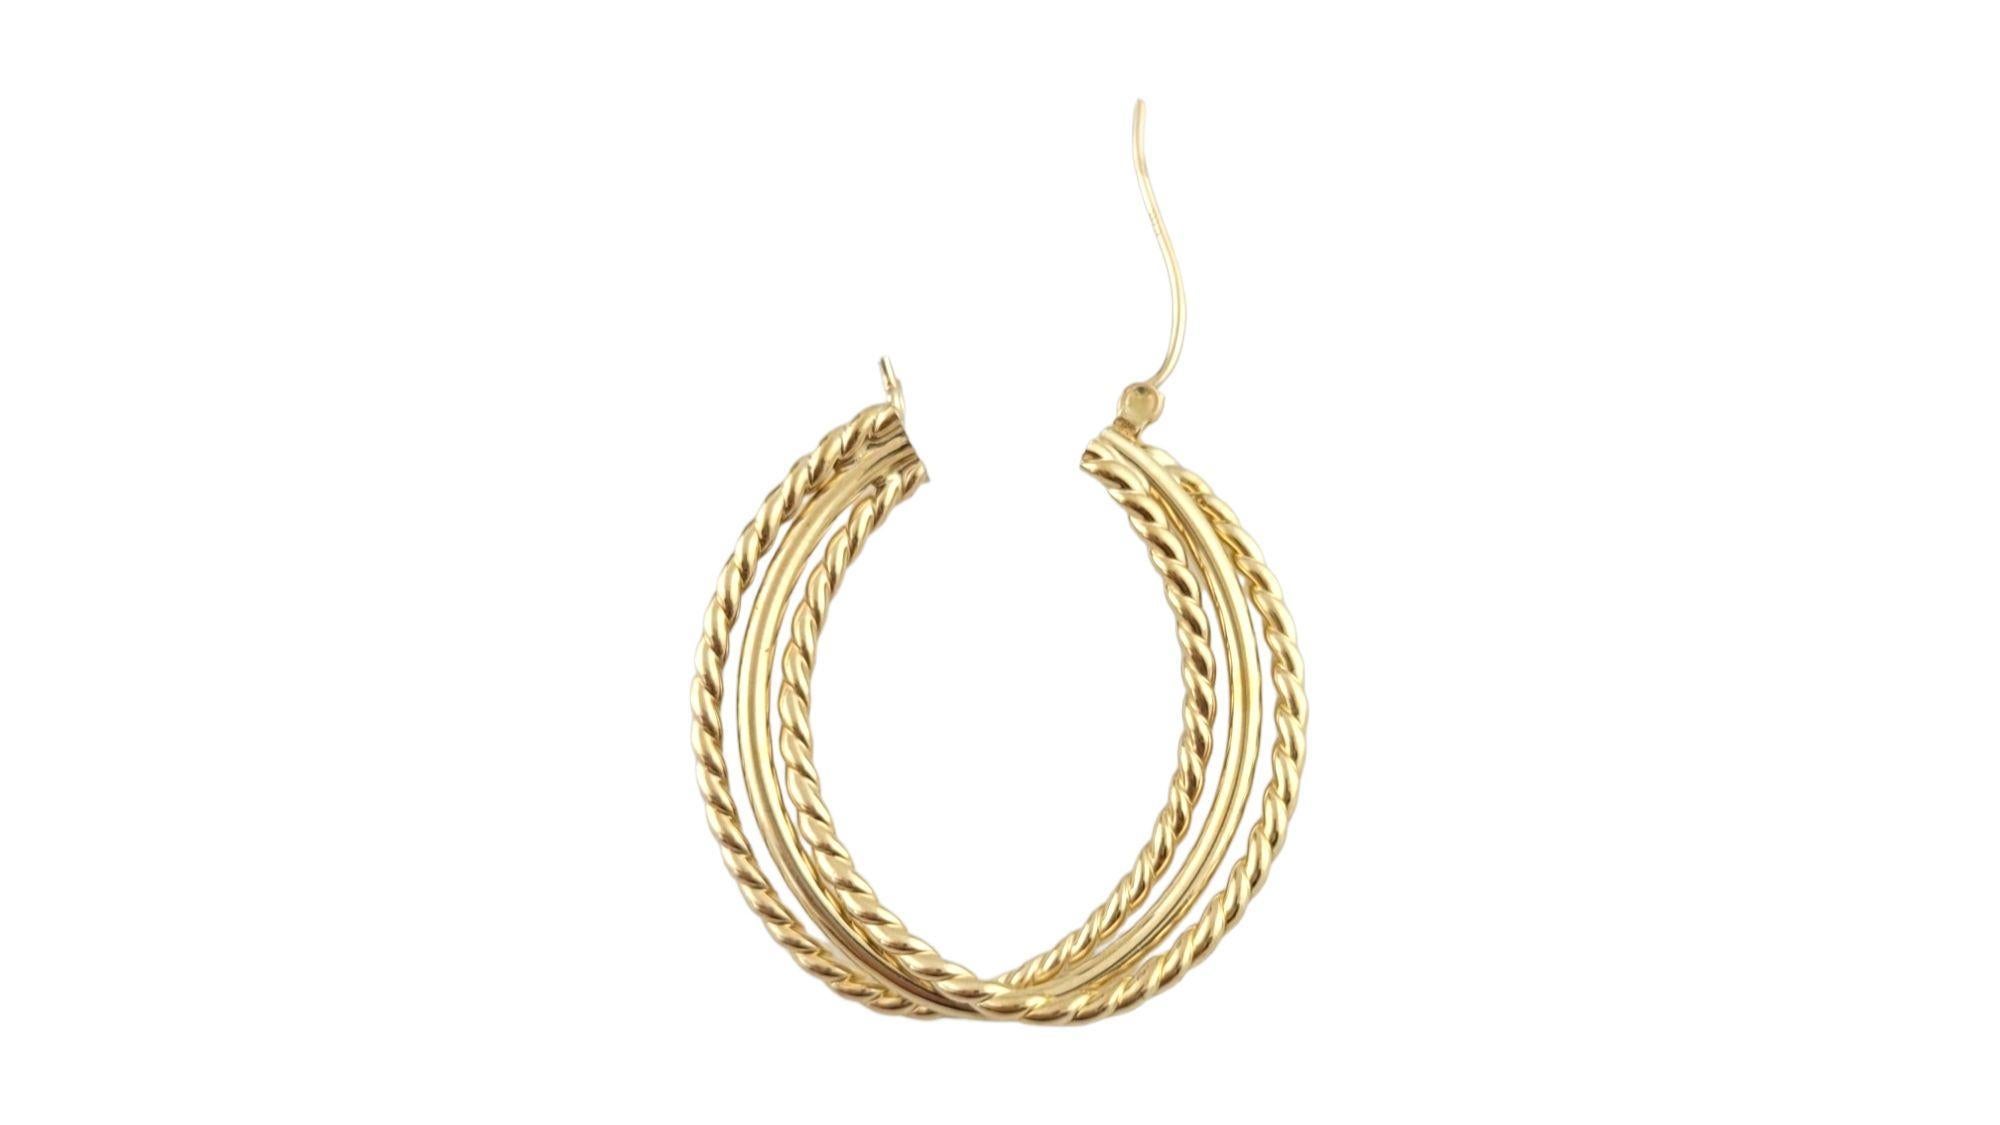  14K Yellow Gold Triple Textured Hoop Earrings #14960 In Good Condition For Sale In Washington Depot, CT